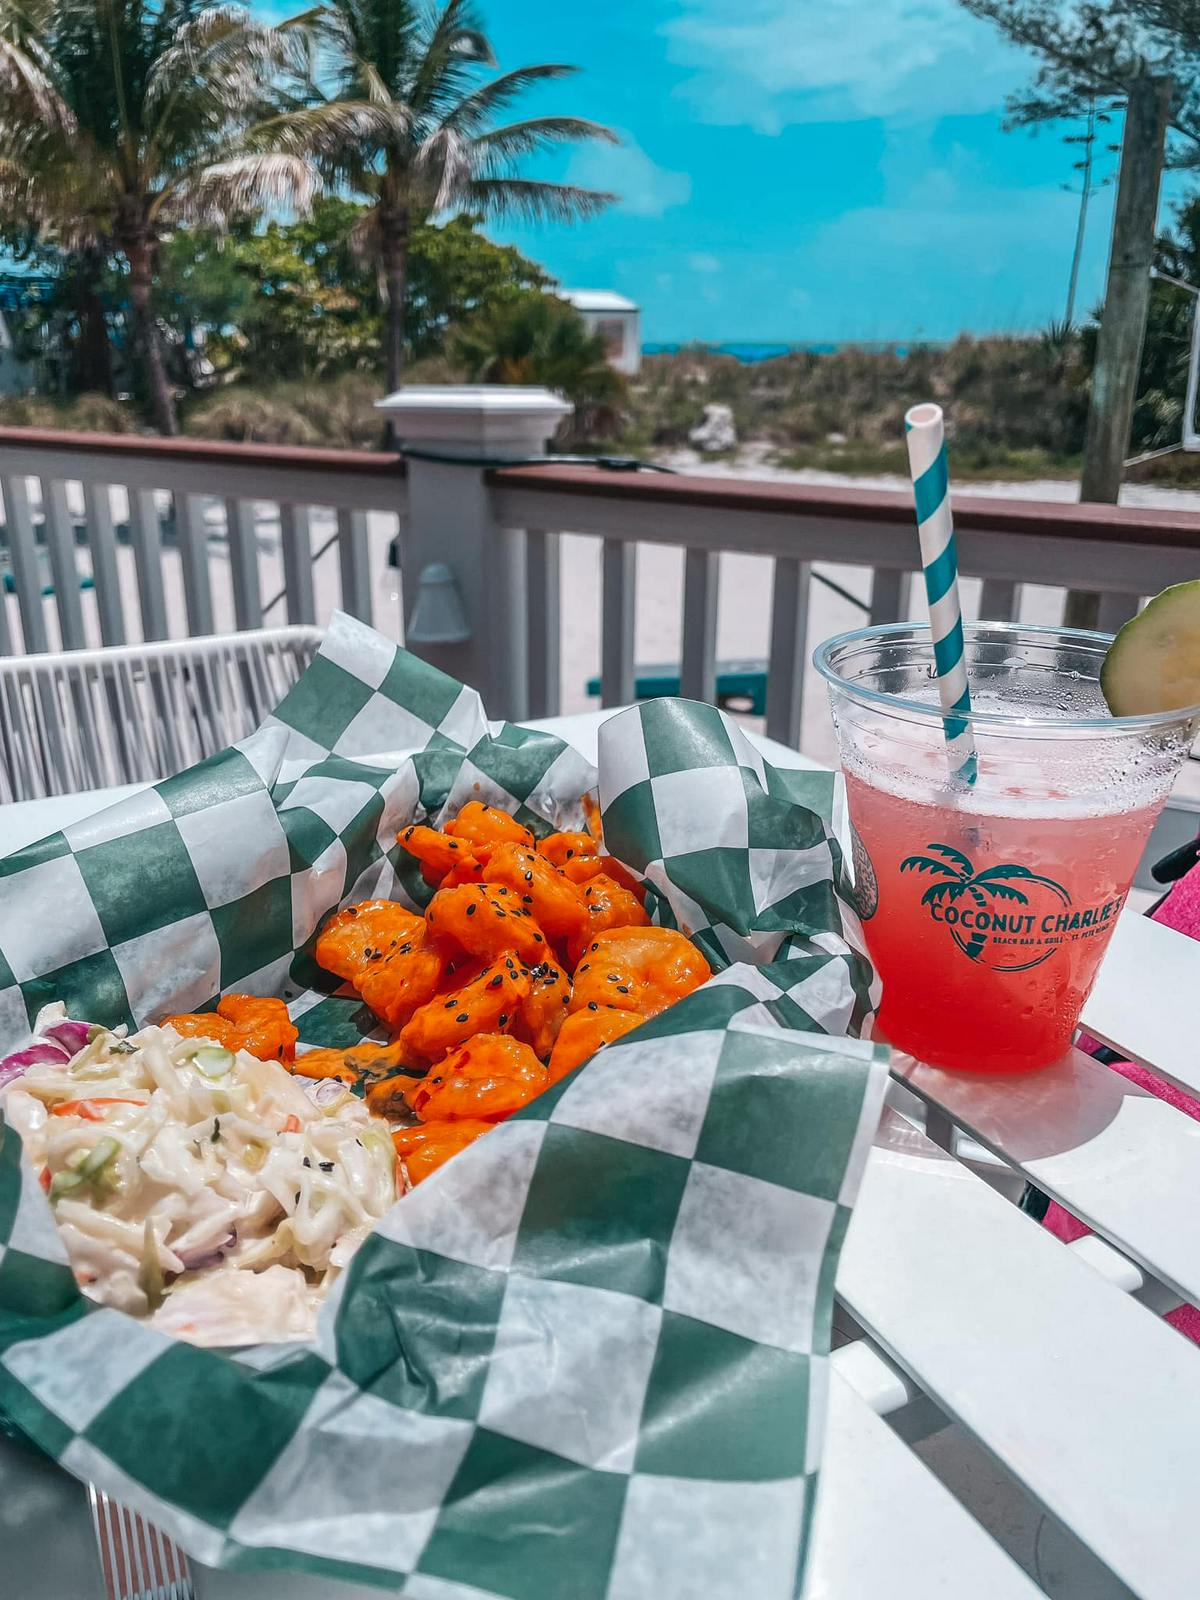 Coconut Charlies St Pete Beach boom boom shrimp and cocktail